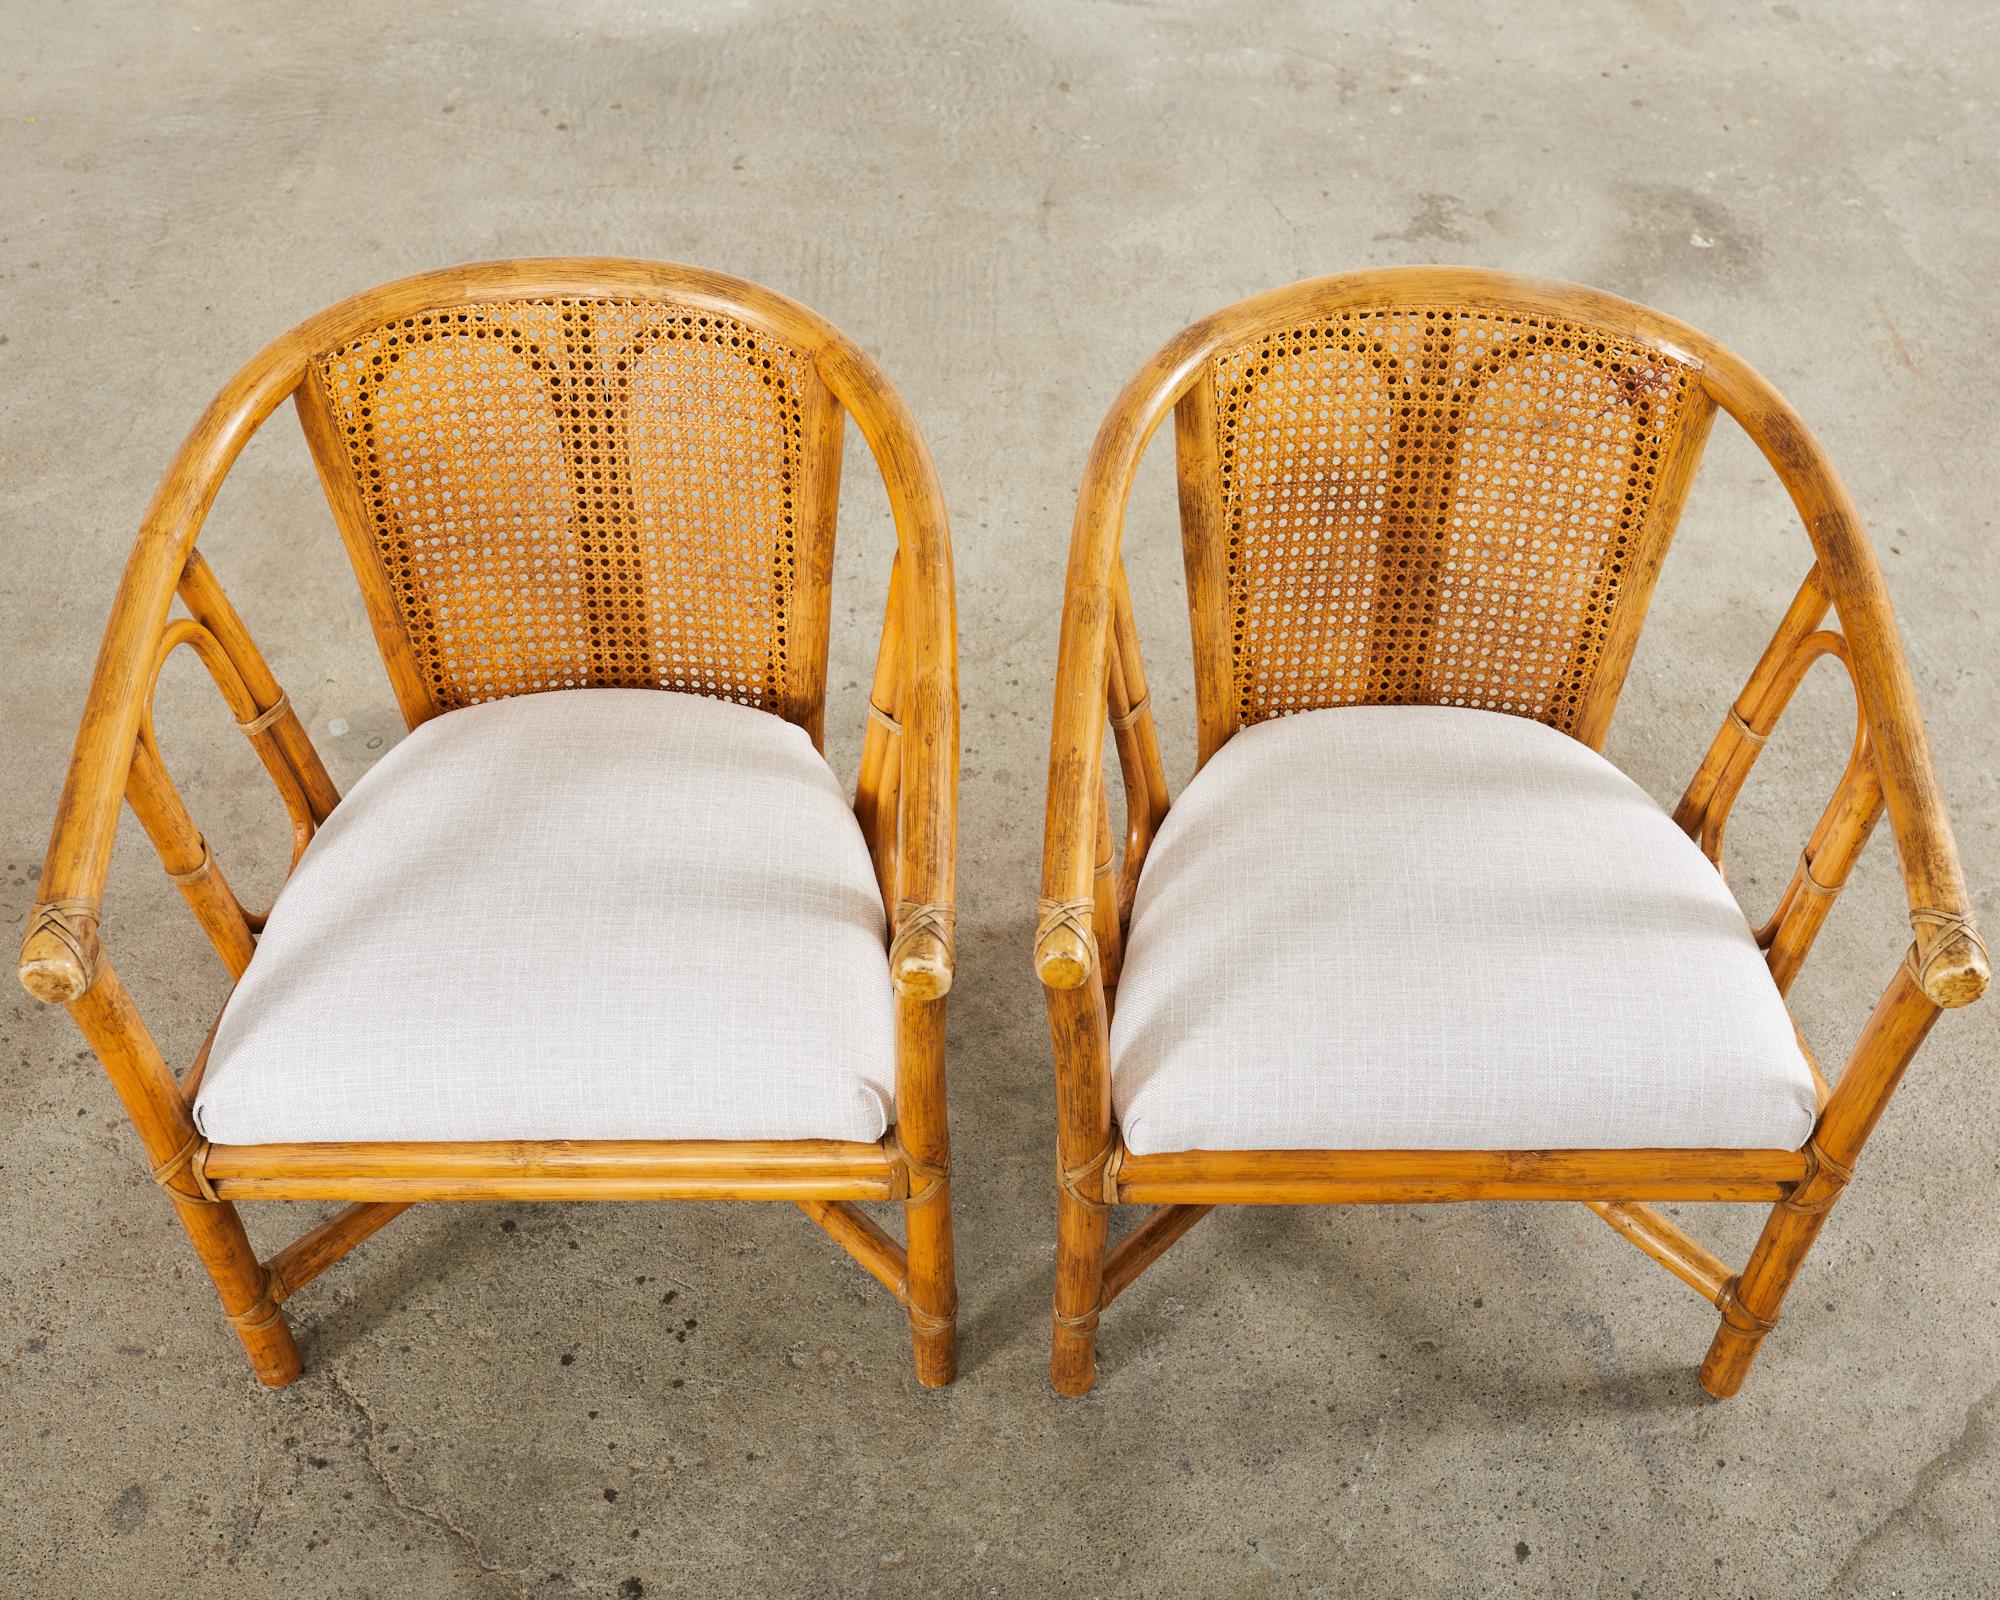 Pair of McGuire Organic Modern Style Rattan Cane Barrel Lounge Chairs In Good Condition For Sale In Rio Vista, CA